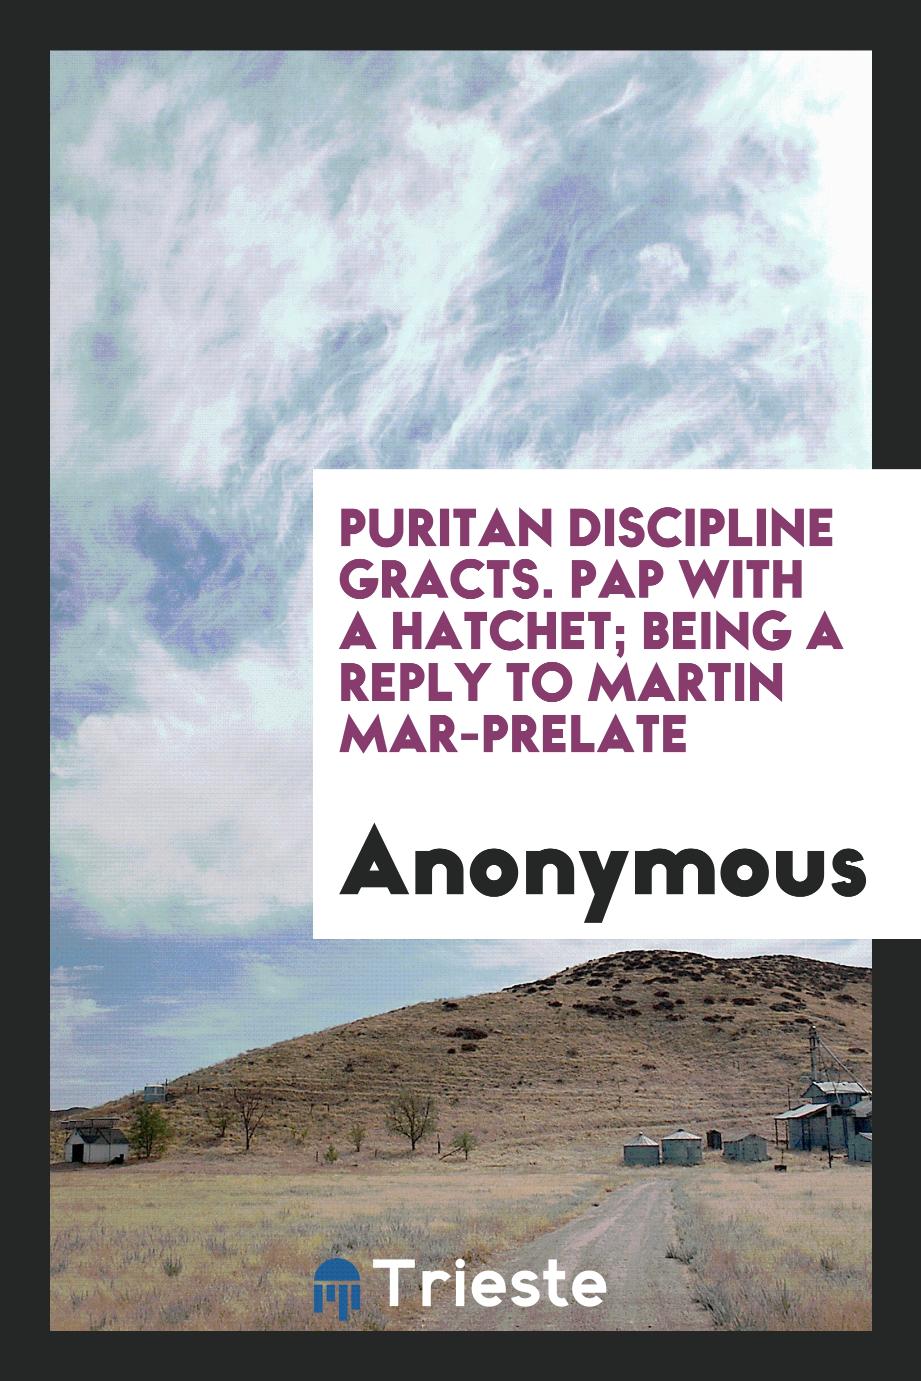 Puritan Discipline Gracts. Pap with a hatchet; being a reply to Martin Mar-Prelate